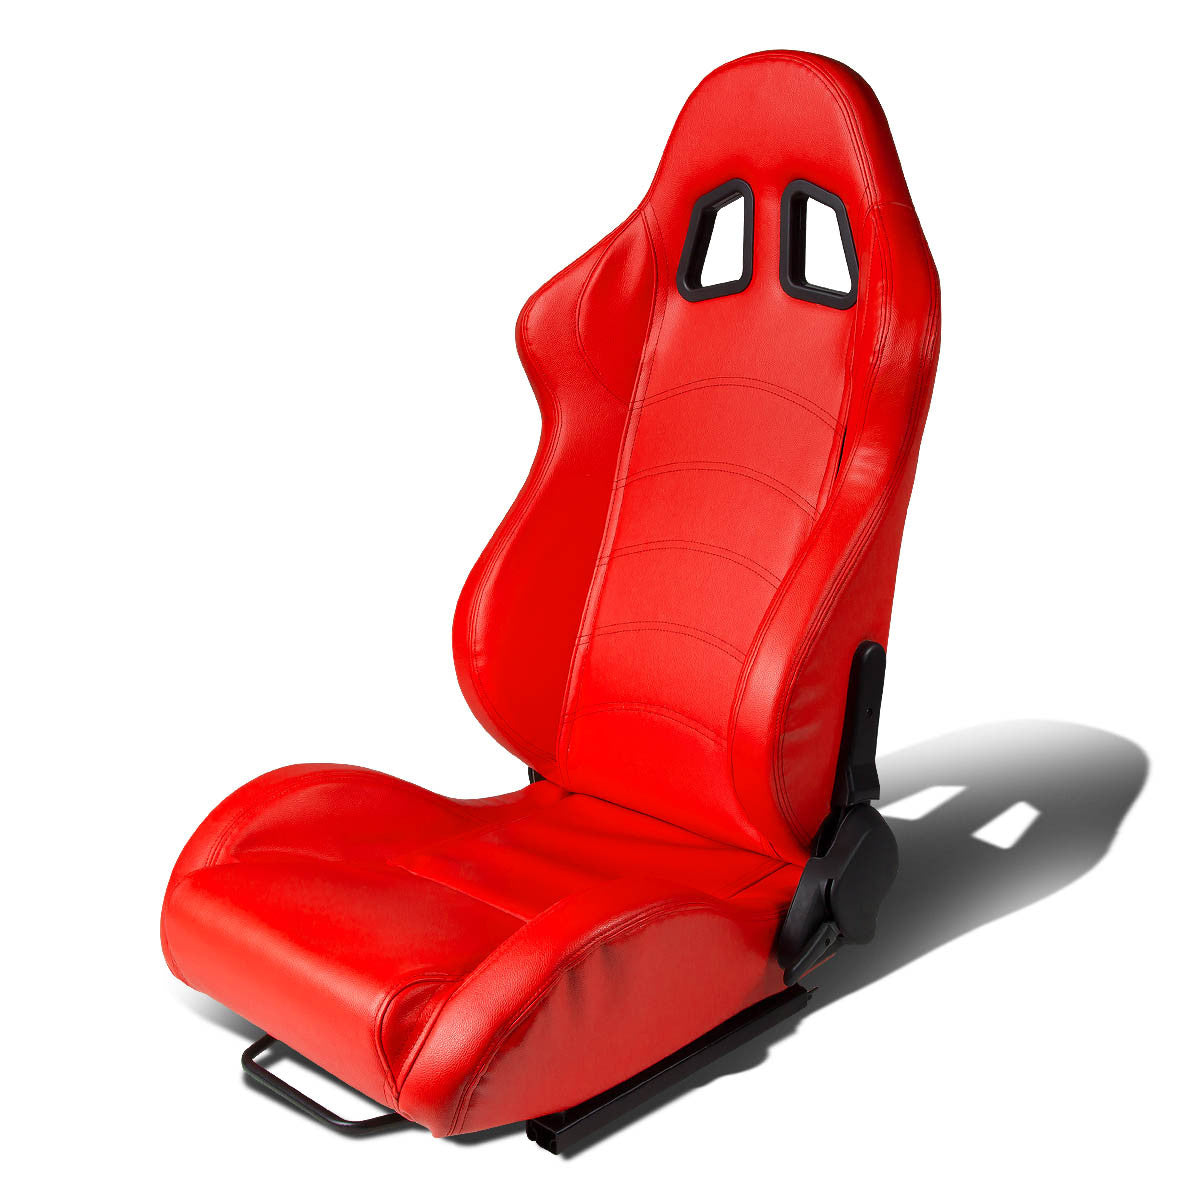 D-Motoring - Racing Seat - Reclinable - PVC Leather - Left - 6